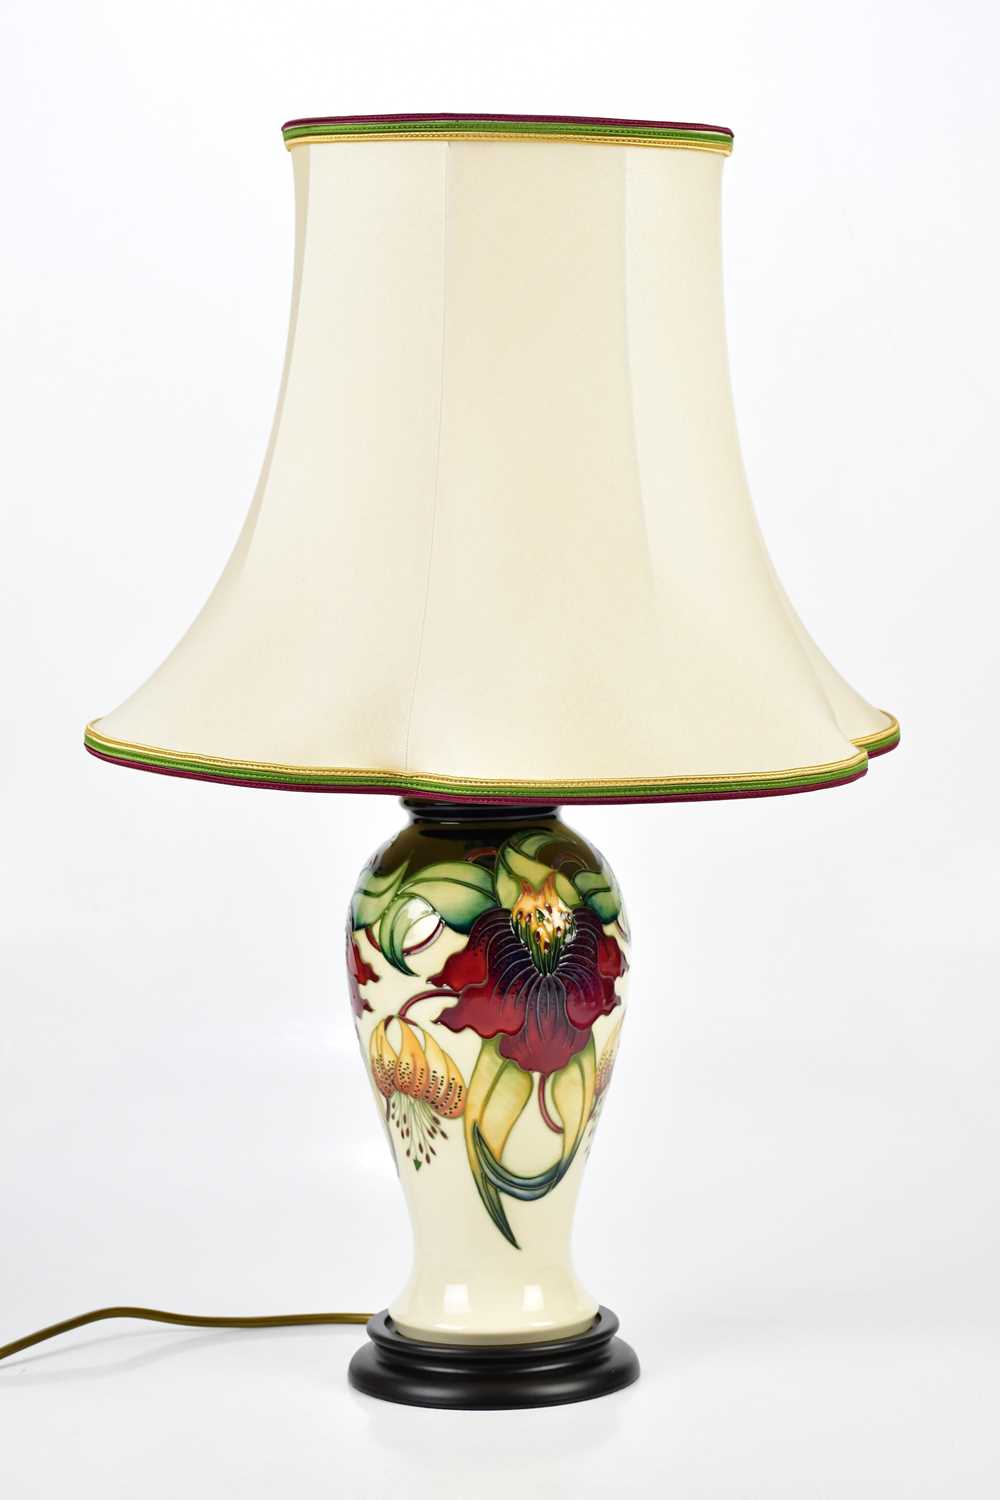 MOORCROFT; an 'Anna Lily' pattern lamp, height 38cm. Condition Report: The item or items in this lot